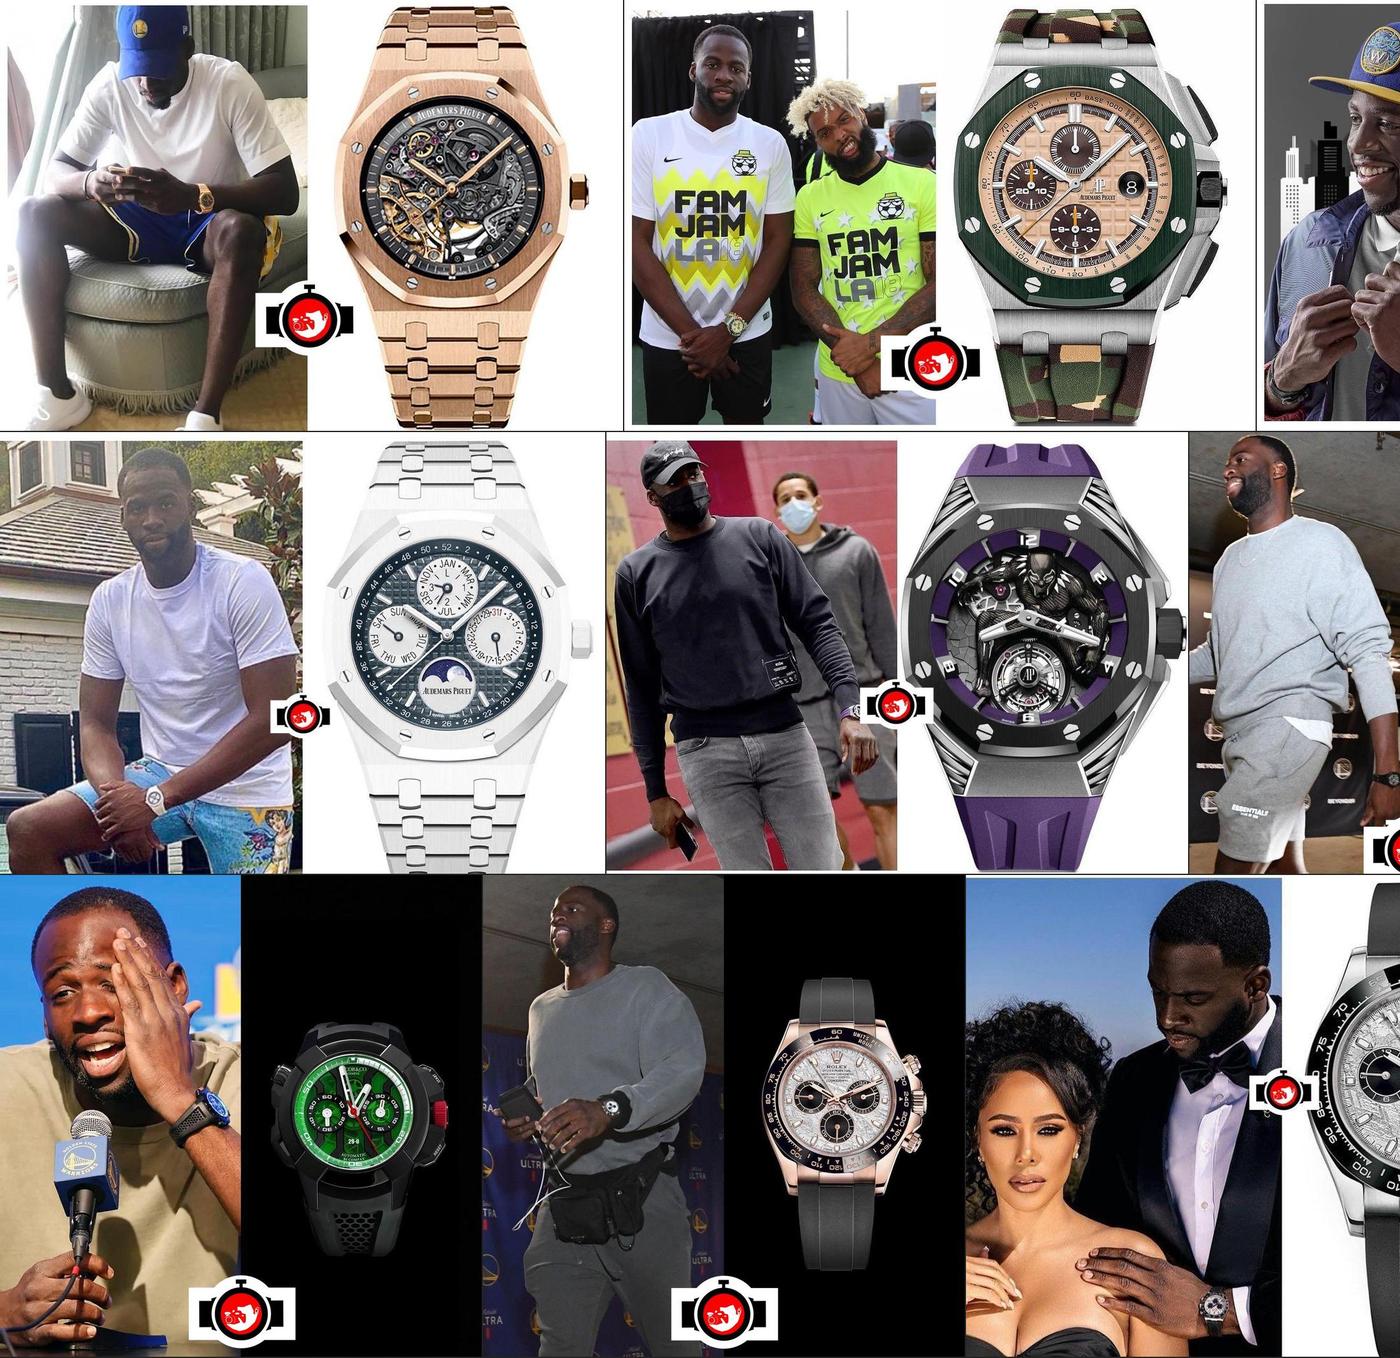 Draymond Green's Impressive Watch Collection: A Look at the Brands He Owns